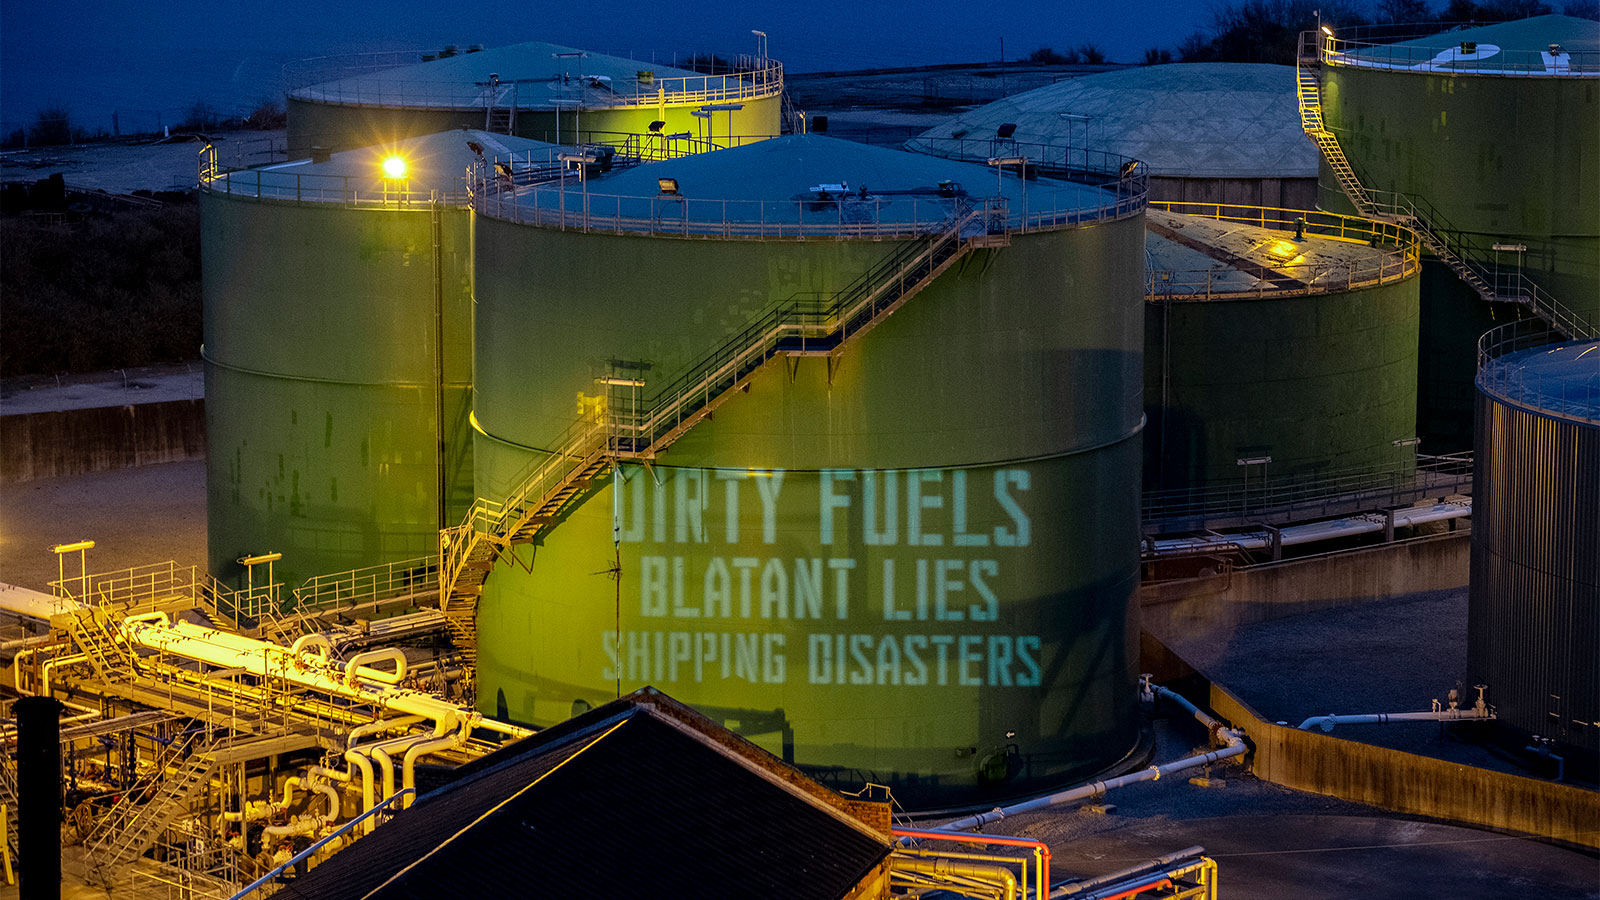 A projected slogan protesting the fuel shipping industry